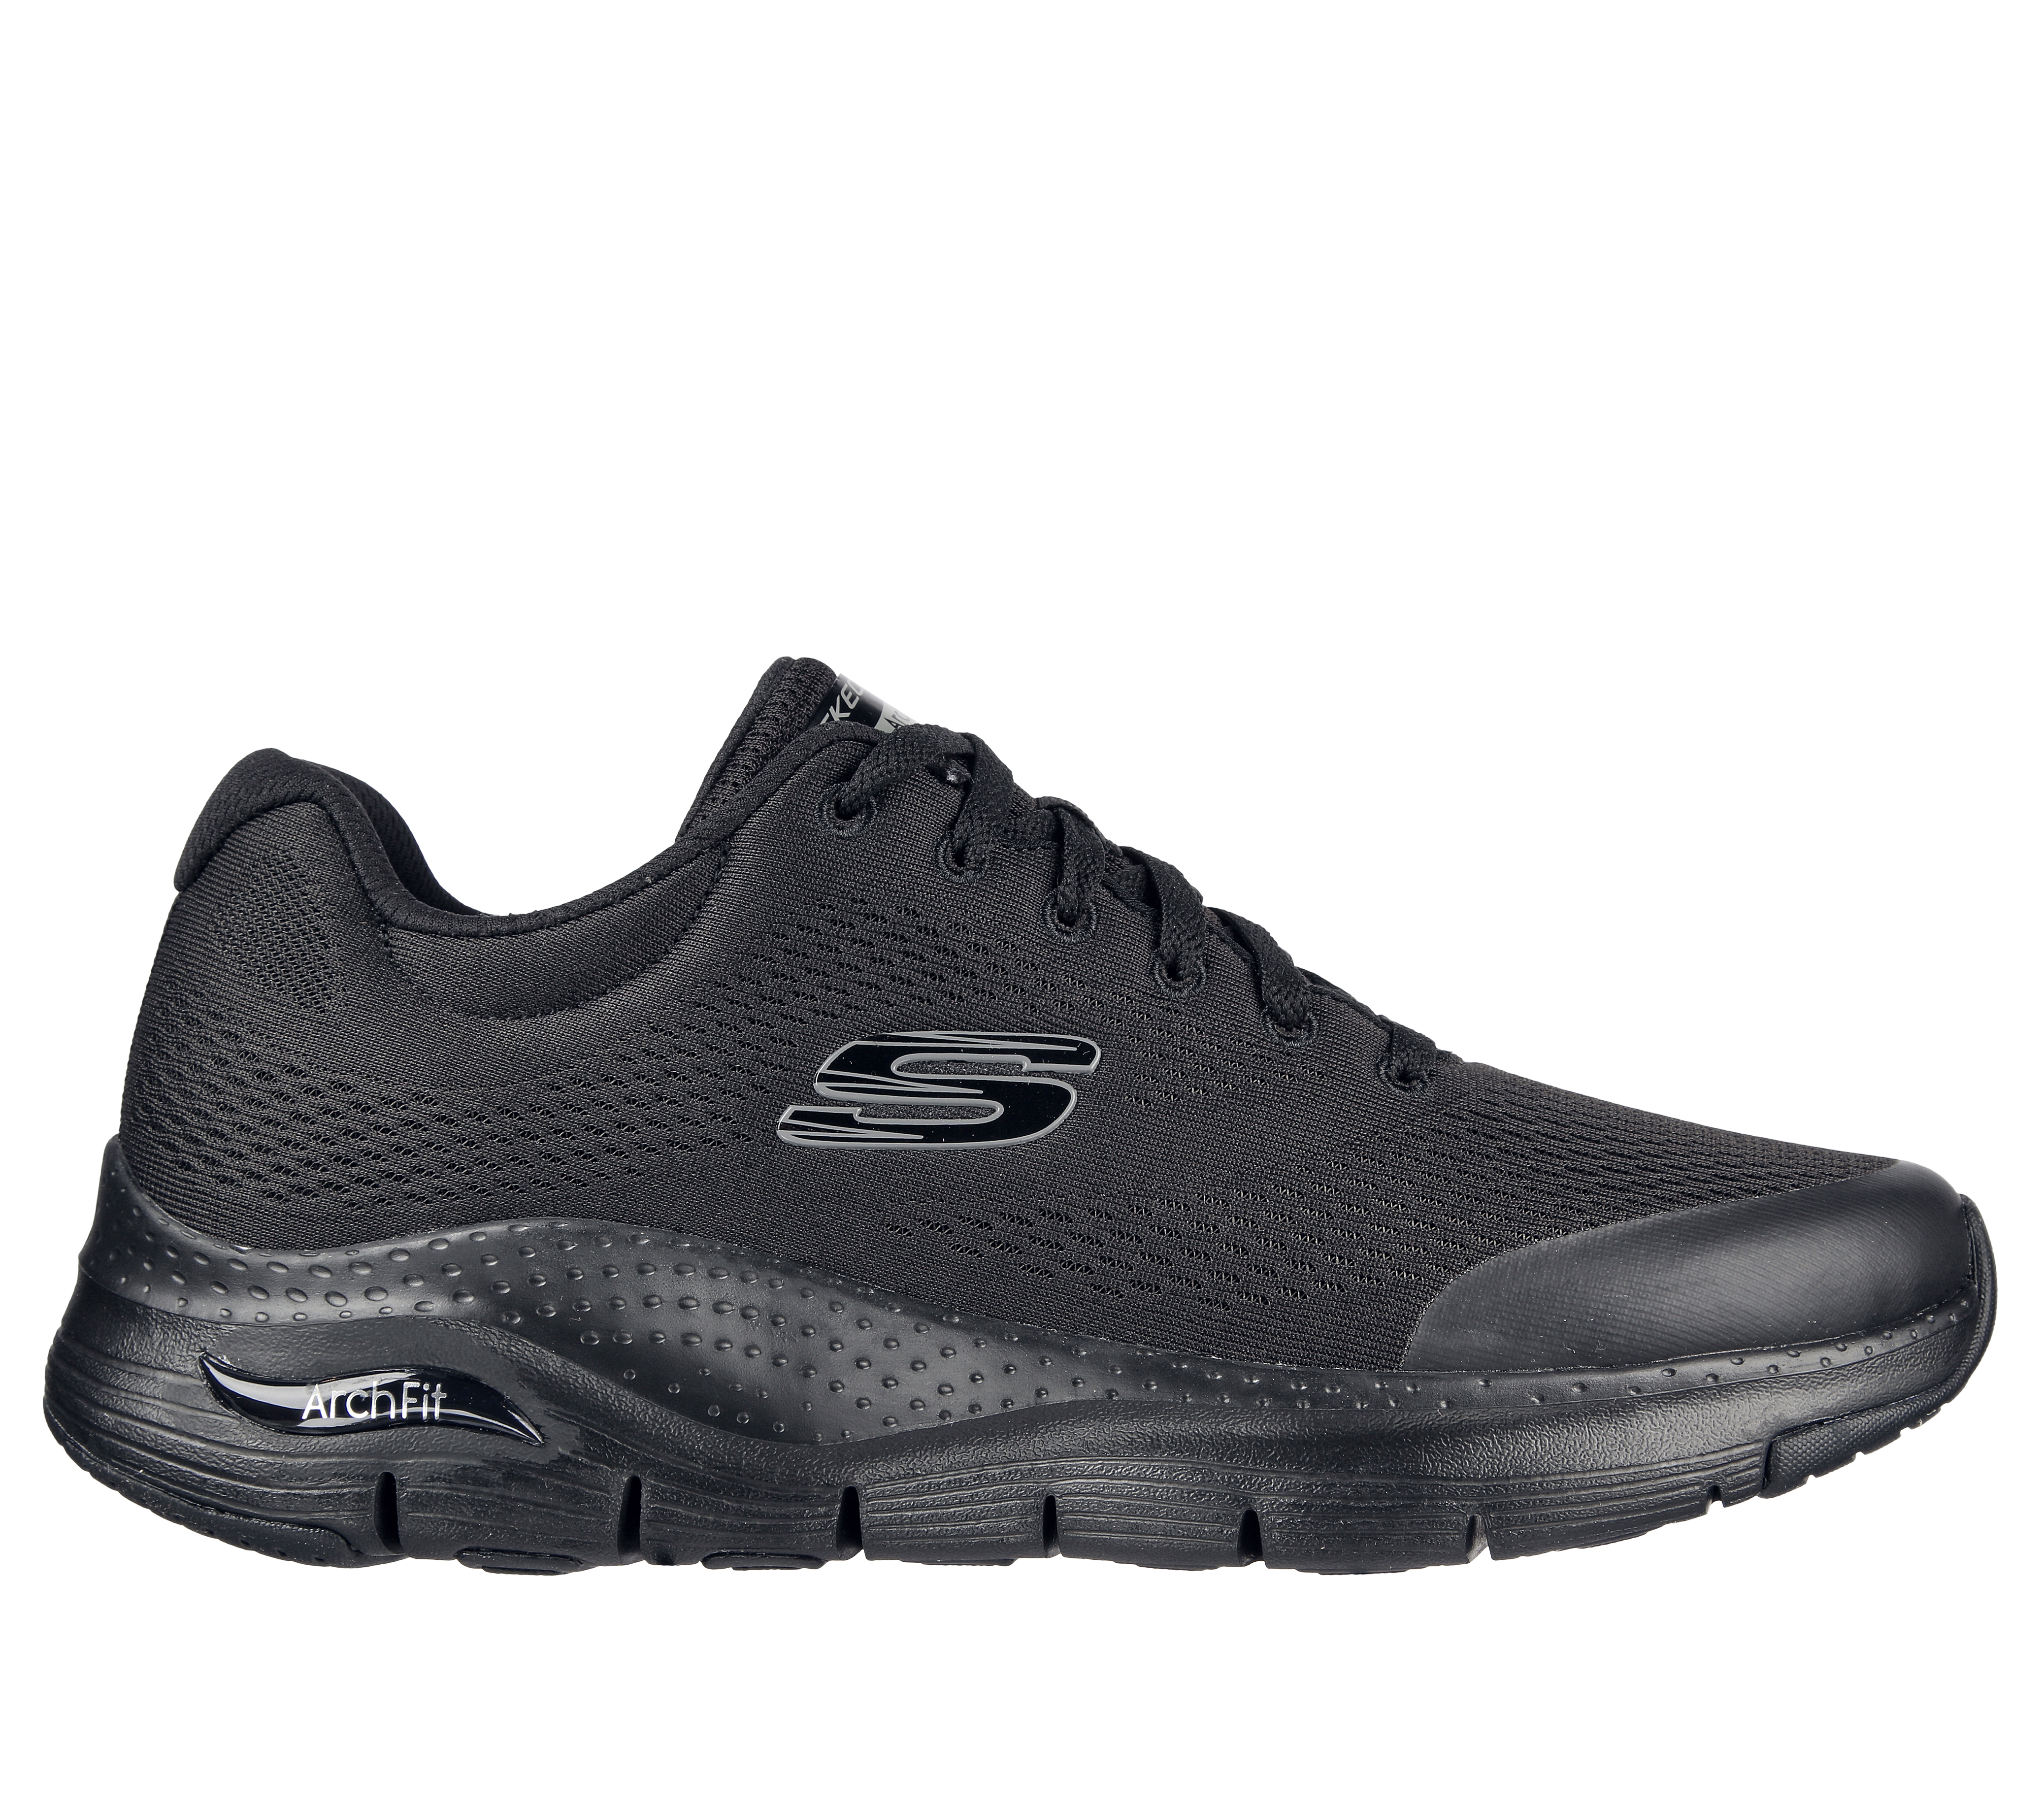 Where Can I Buy Skechers Arch Fit Shoes?